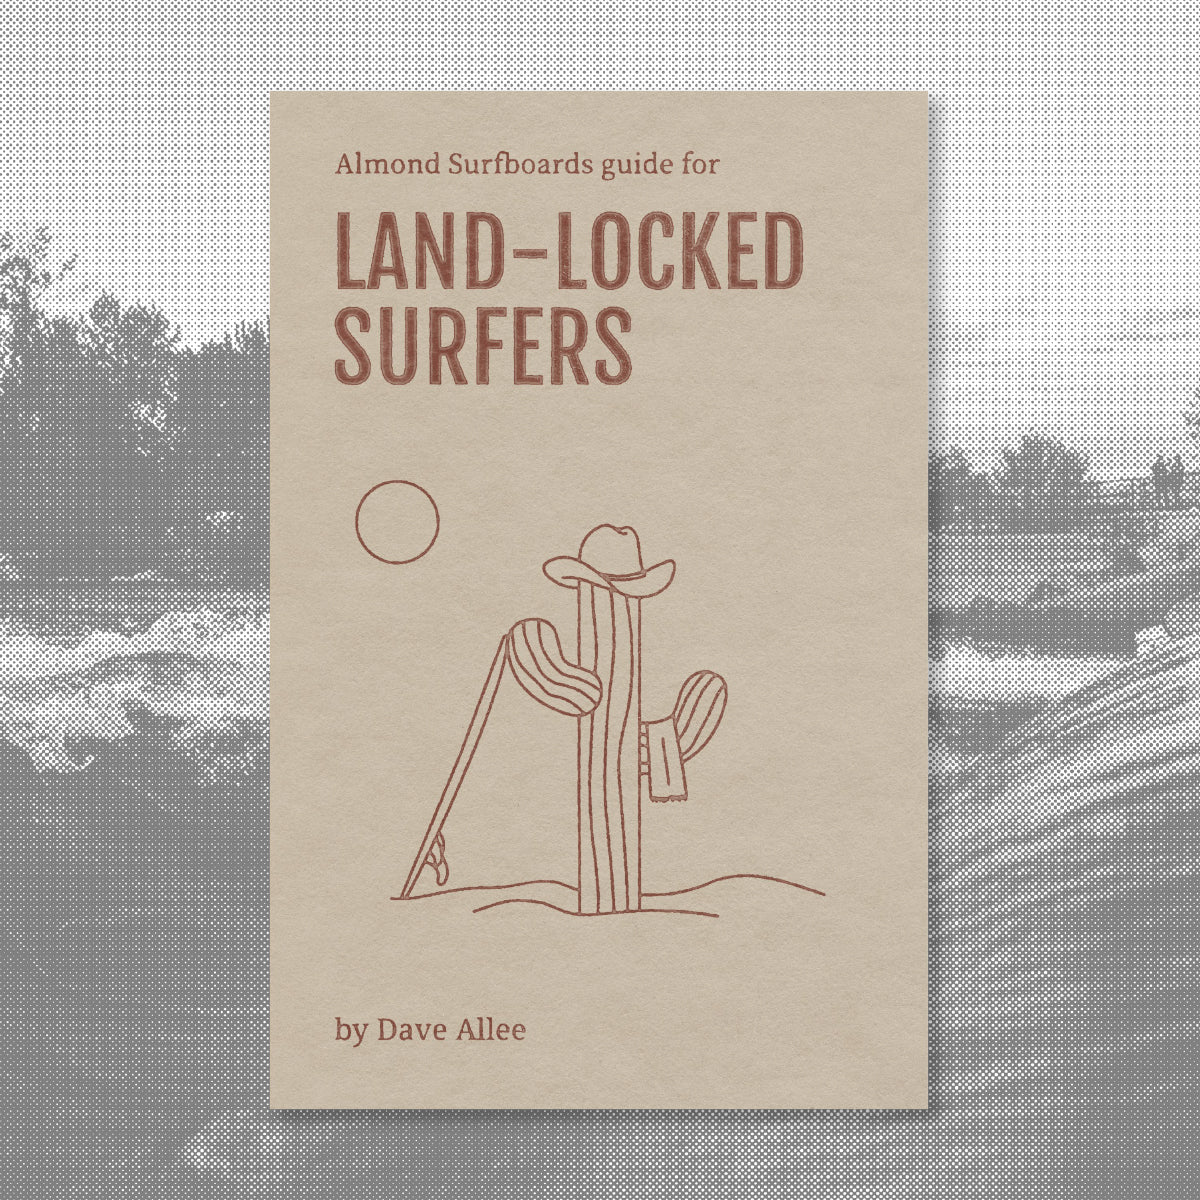 Almond's Guide for Land-Locked Surfers